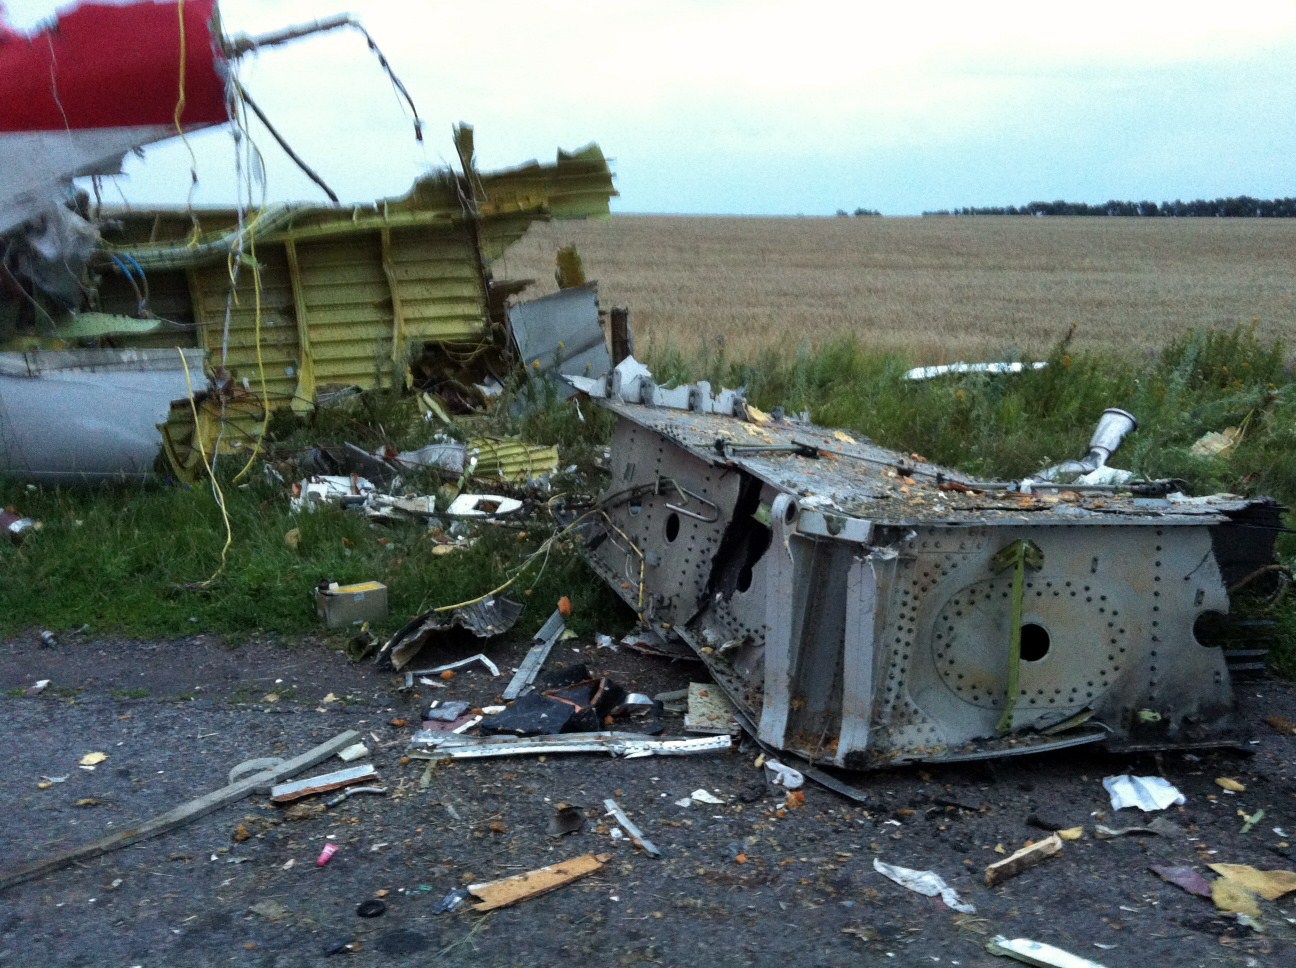 Wreckage of the malaysian airliner carrying 295 people from Amsterdam to Kuala Lumpur after it crashed, in rebel-held east Ukraine July 17, 2014.